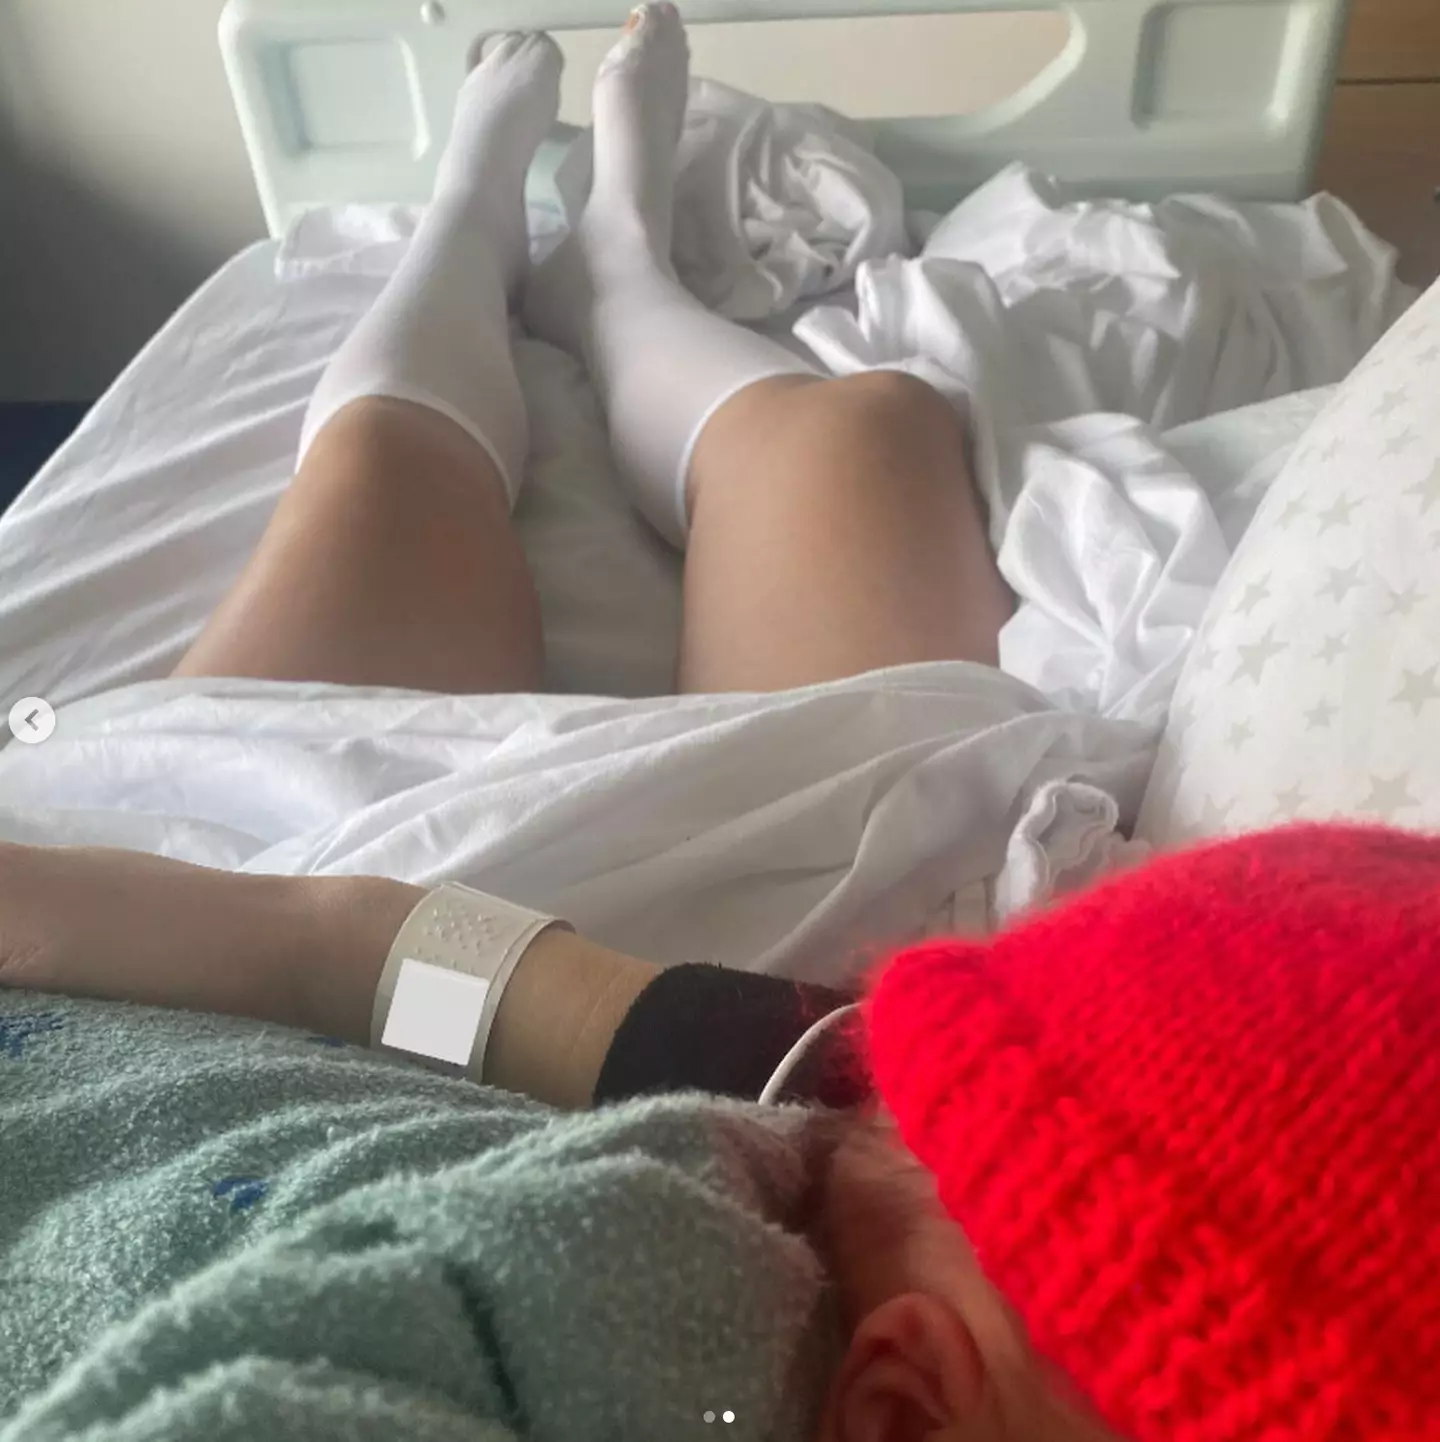 Ellie announced the birth of her son on Instagram.